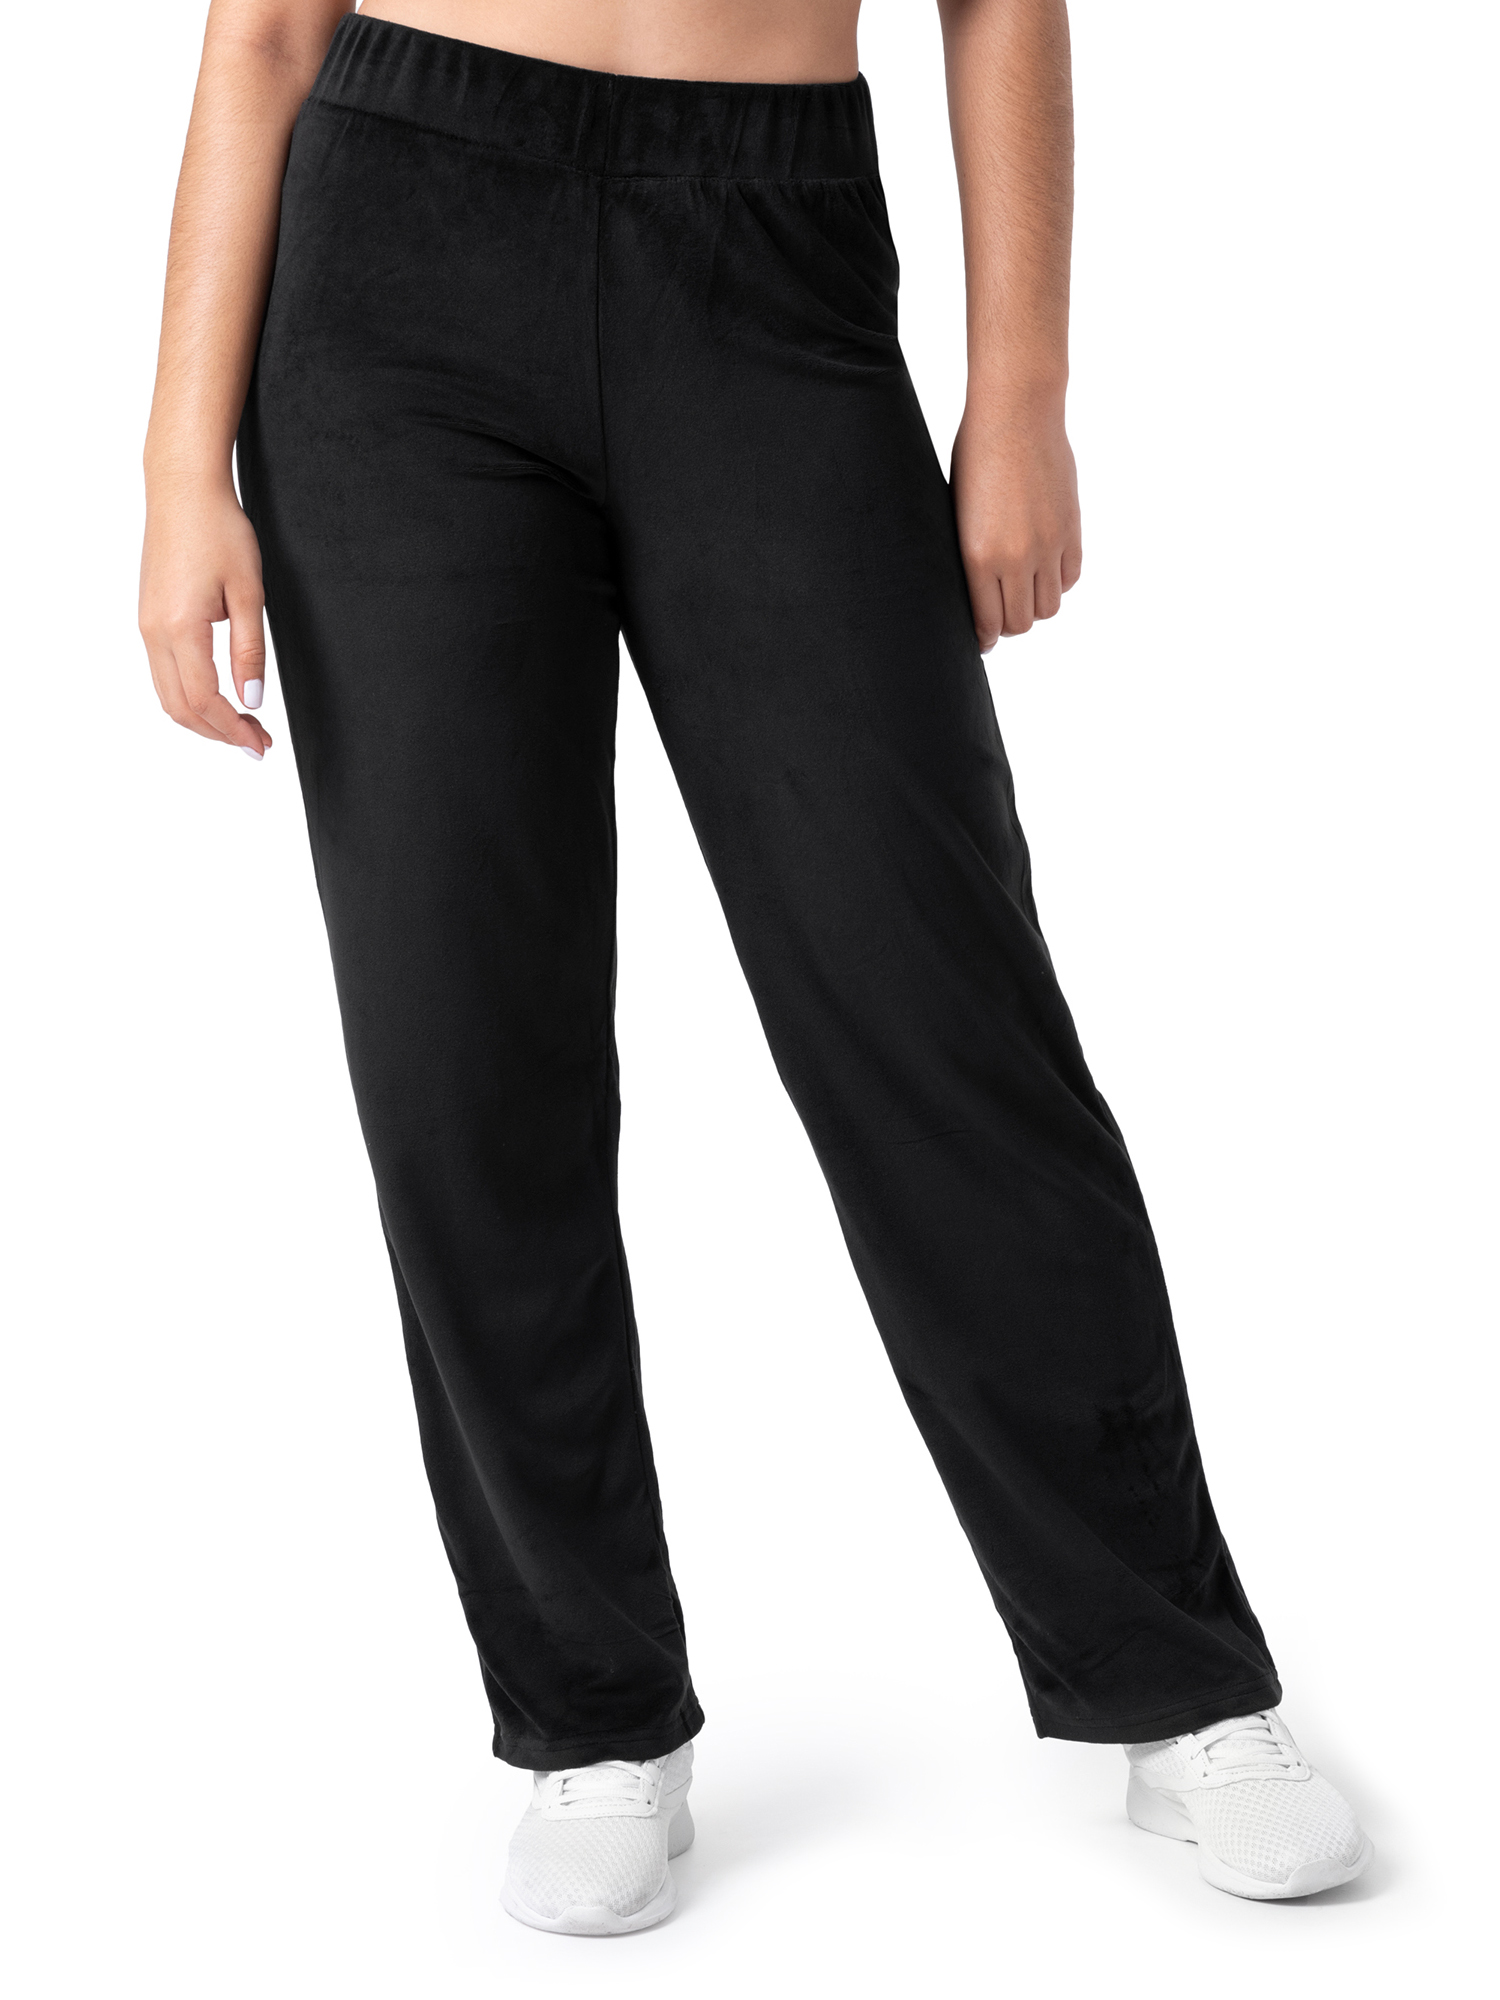 Athletic Works Women's Active Velour Zip-Up Track Jacket and Pants, 2-Piece Set - image 5 of 6